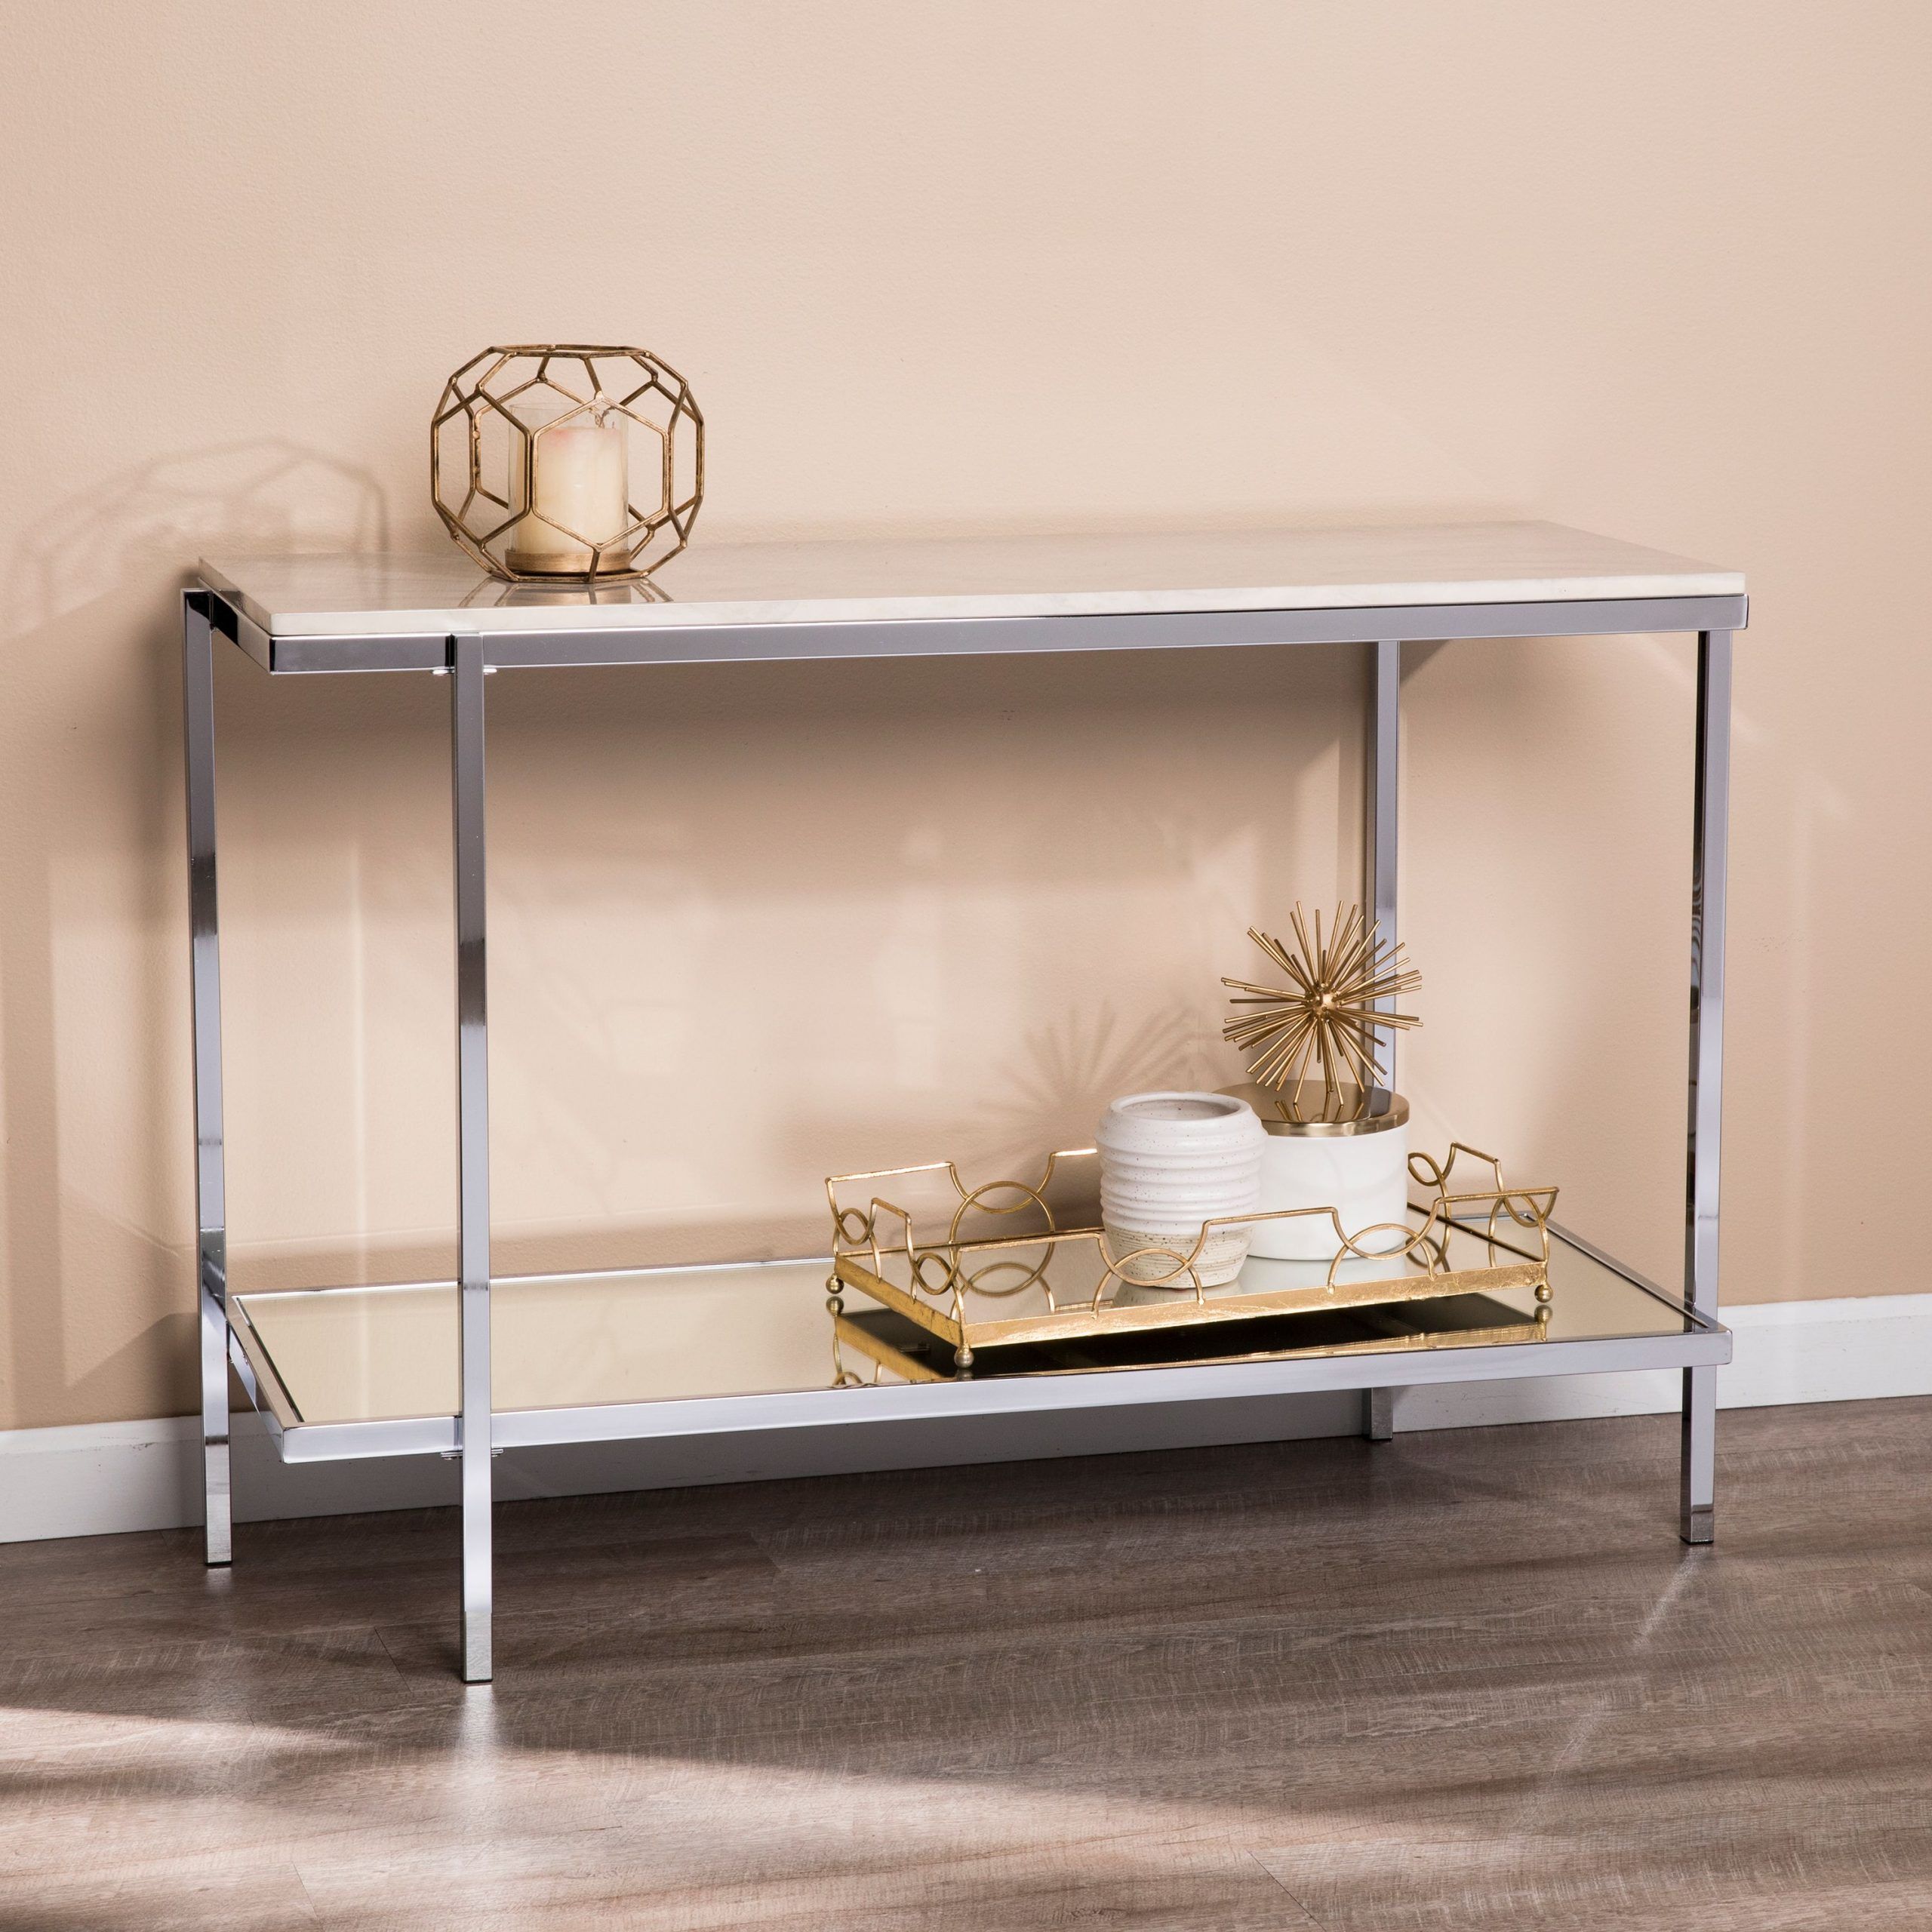 Karei Faux Marble Console Table, Glam, Chromeember Interiors Regarding Faux Marble Console Tables (View 14 of 20)